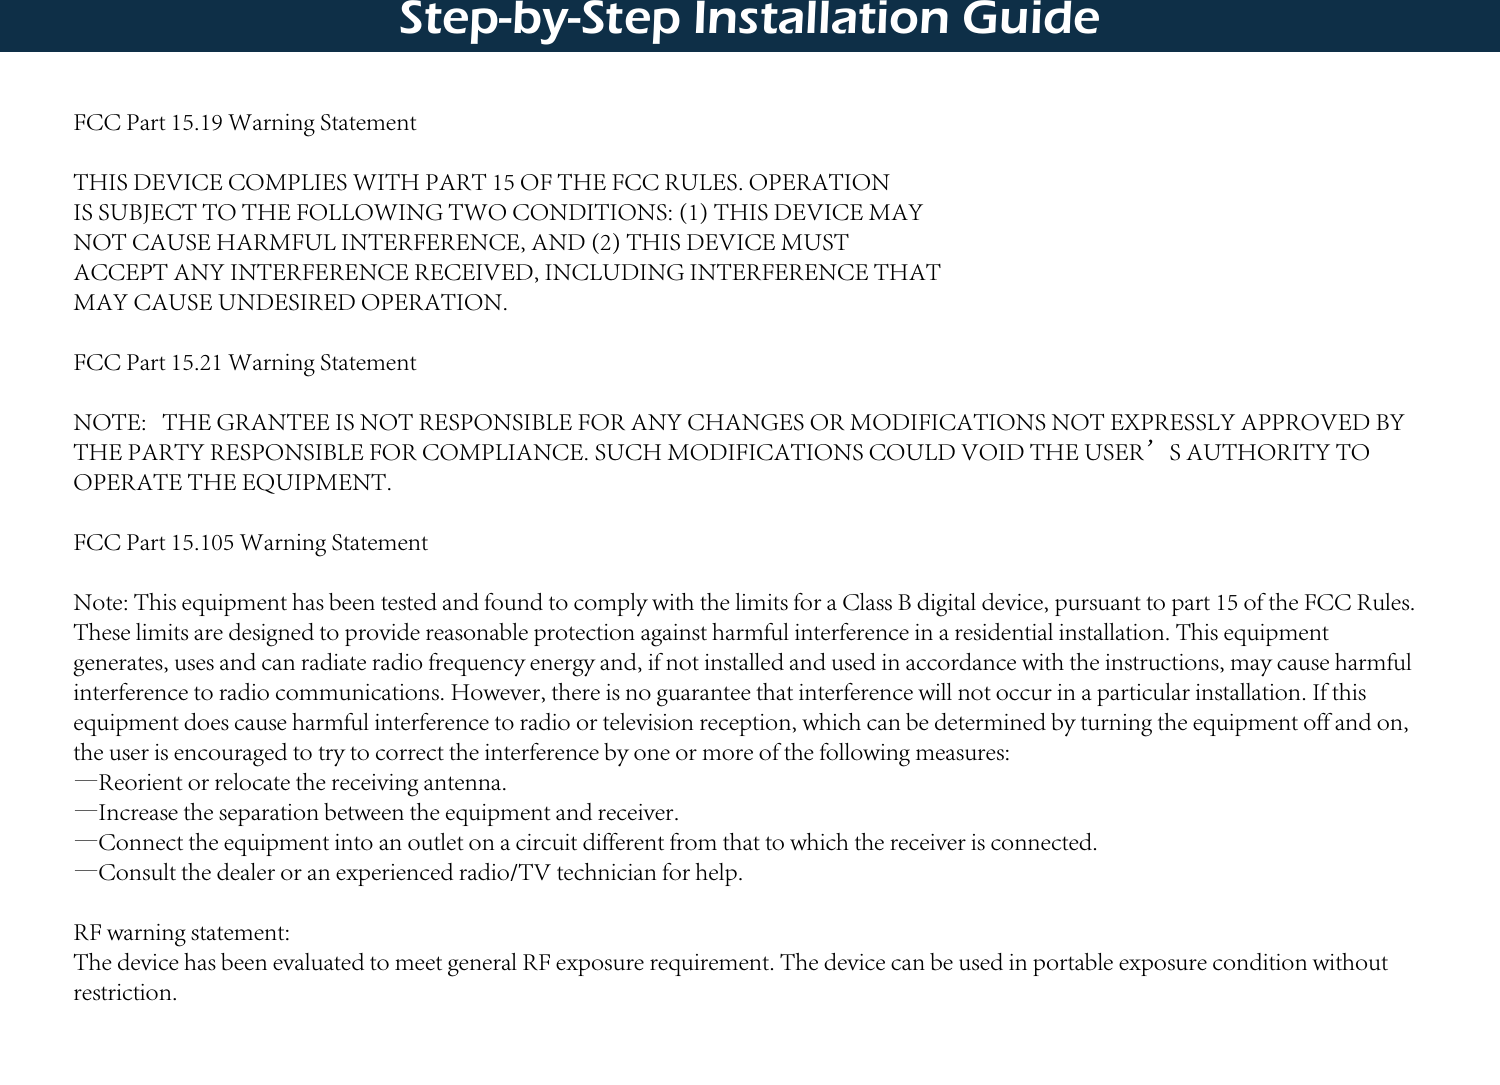 Step-by-Step Installation GuideFCC Part 15.19 Warning Statement THIS DEVICE COMPLIES WITH PART 15 OF THE FCC RULES. OPERATIONIS SUBJECT TO THE FOLLOWING TWO CONDITIONS: (1) THIS DEVICE MAYNOT CAUSE HARMFUL INTERFERENCE, AND (2) THIS DEVICE MUSTACCEPT ANY INTERFERENCE RECEIVED, INCLUDING INTERFERENCE THATMAY CAUSE UNDESIRED OPERATION.FCC Part 15.21 Warning StatementNOTE:   THE GRANTEE IS NOT RESPONSIBLE FOR ANY CHANGES OR MODIFICATIONS NOT EXPRESSLY APPROVED BY THE PARTY RESPONSIBLE FOR COMPLIANCE. SUCH MODIFICATIONS COULD VOID THE USER’S AUTHORITY TO OPERATE THE EQUIPMENT.FCC Part 15.105 Warning StatementNote: This equipment has been tested and found to comply with the limits for a Class B digital device, pursuant to part 15 of the FCC Rules. These limits are designed to provide reasonable protection against harmful interference in a residential installation. This equipment generates, uses and can radiate radio frequency energy and, if not installed and used in accordance with the instructions, may cause harmful interference to radio communications. However, there is no guarantee that interference will not occur in a particular installation. If this equipment does cause harmful interference to radio or television reception, which can be determined by turning the equipment off and on, the user is encouraged to try to correct the interference by one or more of the following measures:—Reorient or relocate the receiving antenna.—Increase the separation between the equipment and receiver.—Connect the equipment into an outlet on a circuit different from that to which the receiver is connected.—Consult the dealer or an experienced radio/TV technician for help.RF warning statement:The device has been evaluated to meet general RF exposure requirement. The device can be used in portable exposure condition without restriction.